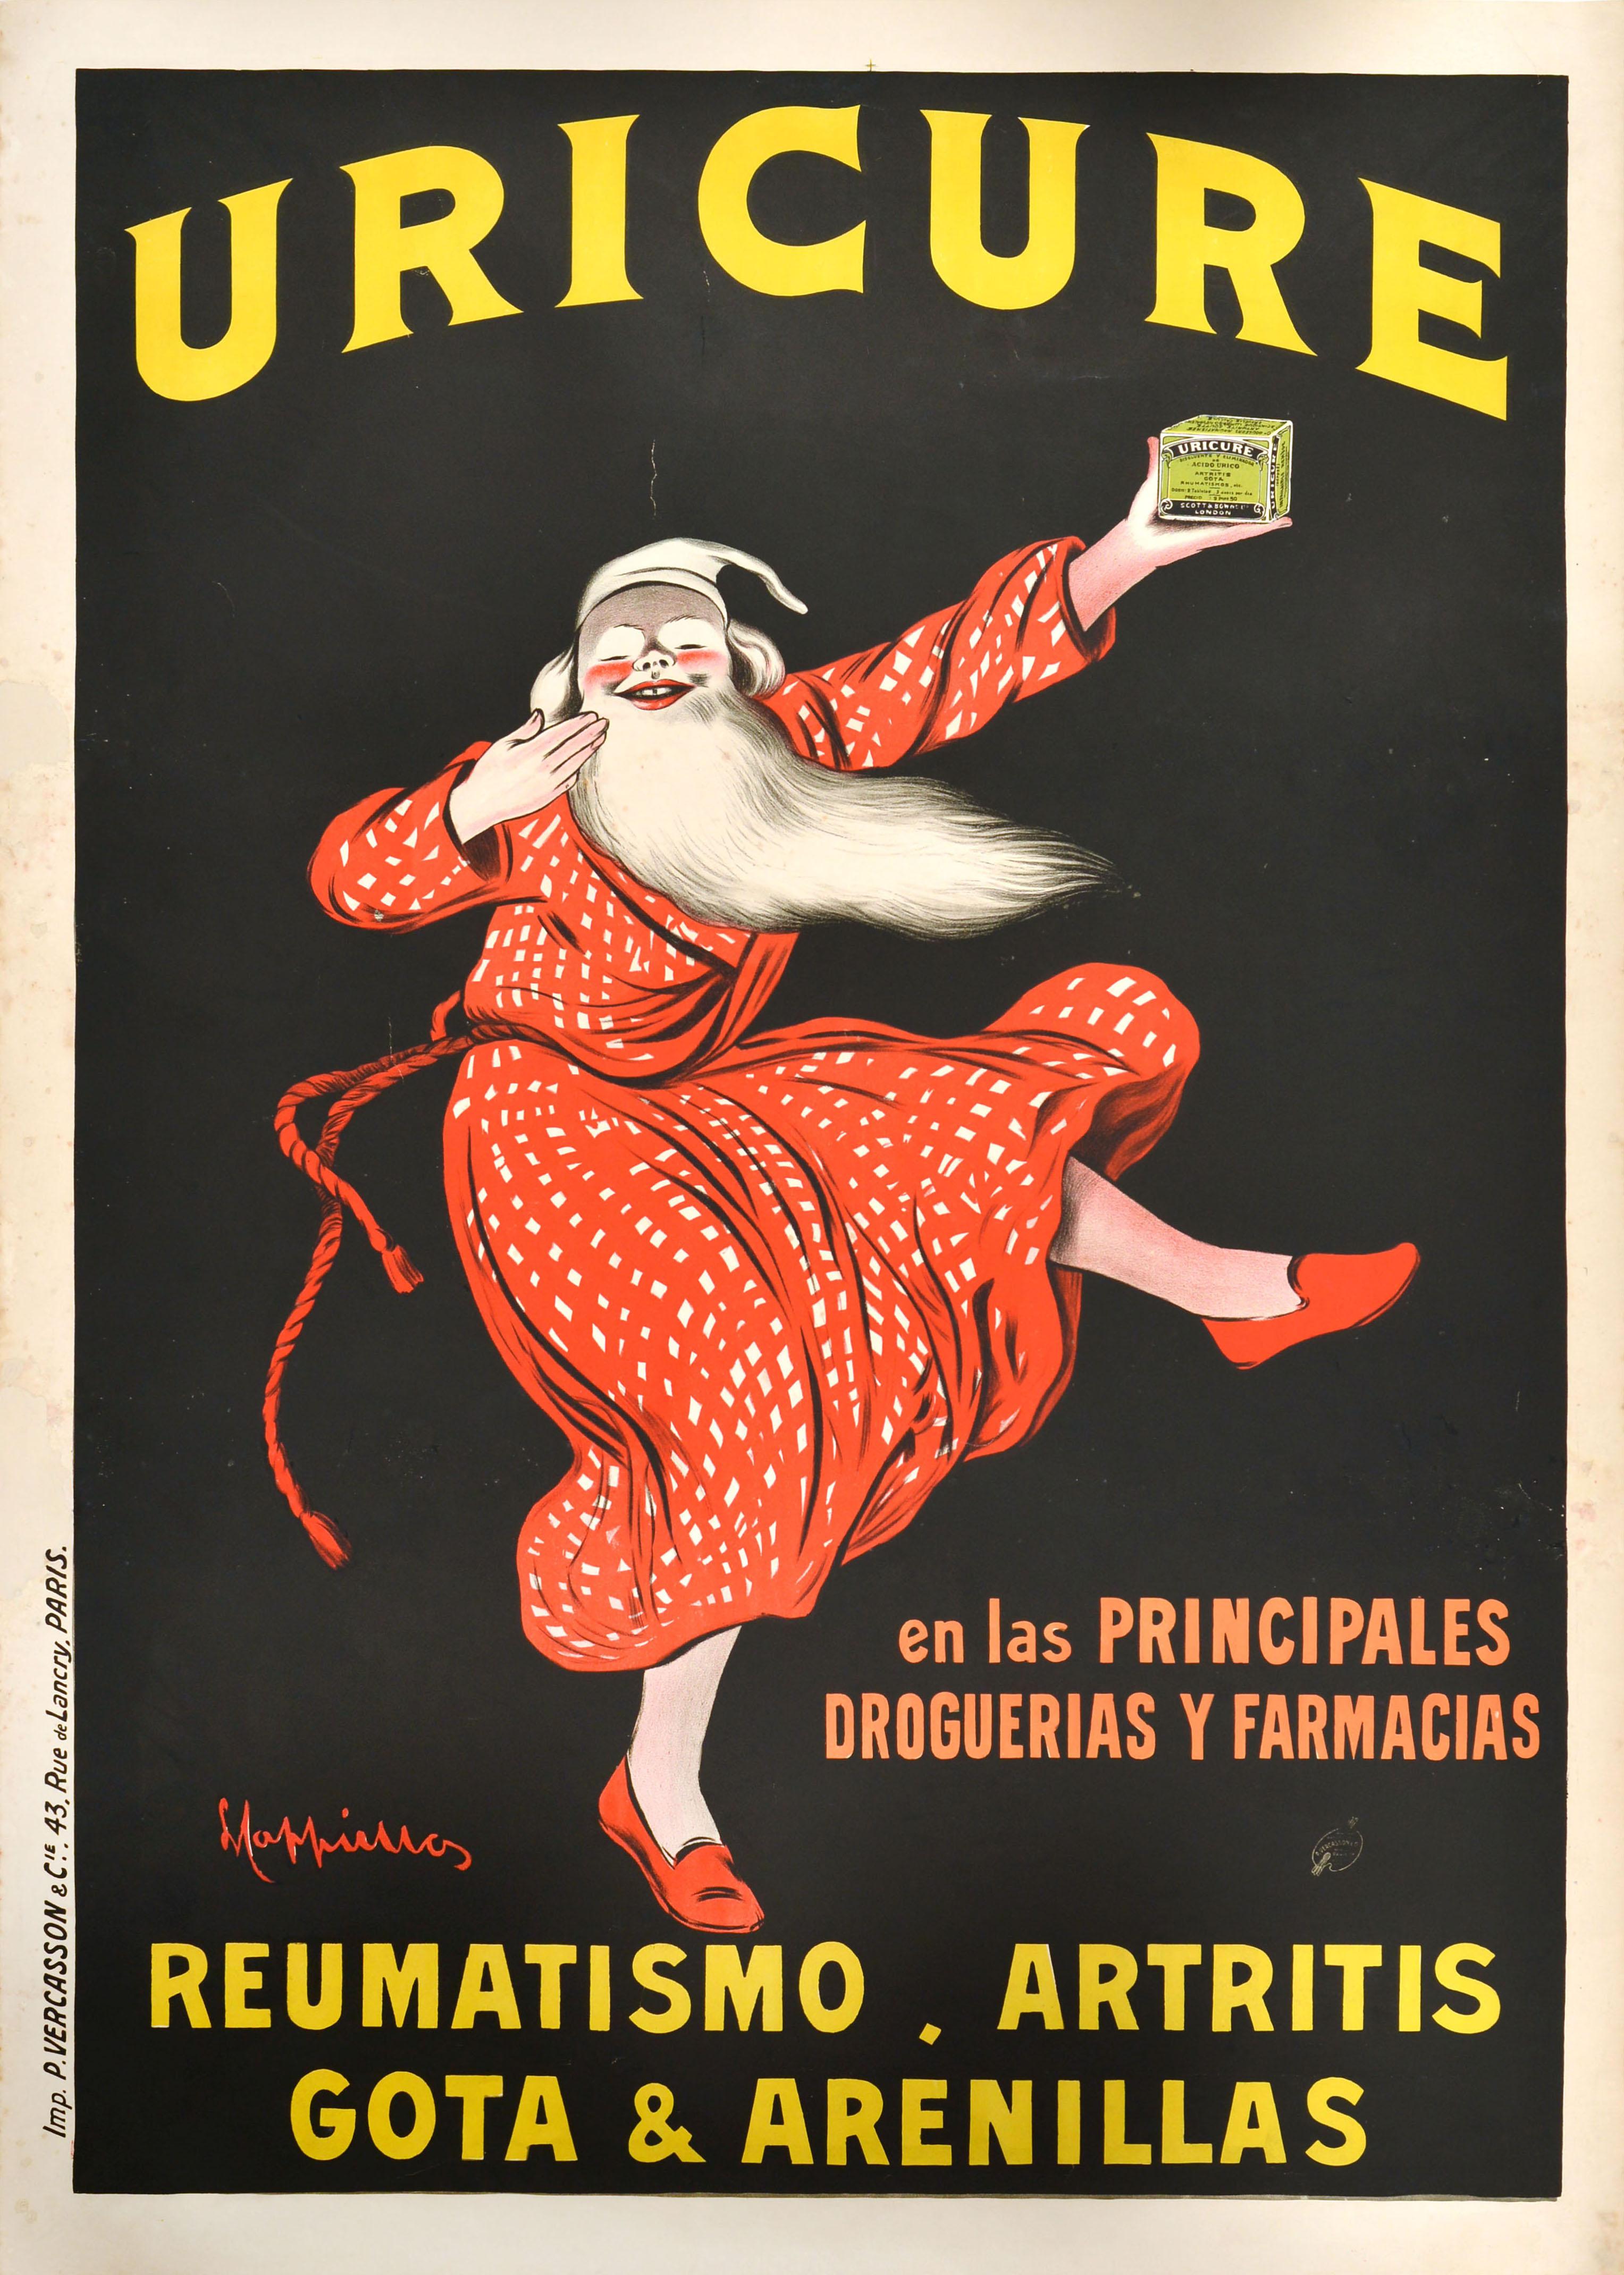 Original antique advertising poster by the renowned poster artist Leonetto Cappiello (1875-1942) for Uricure featuring a great design depicting a smiling elderly man with a white beard wearing a red and white dressing gown and white cap dancing in